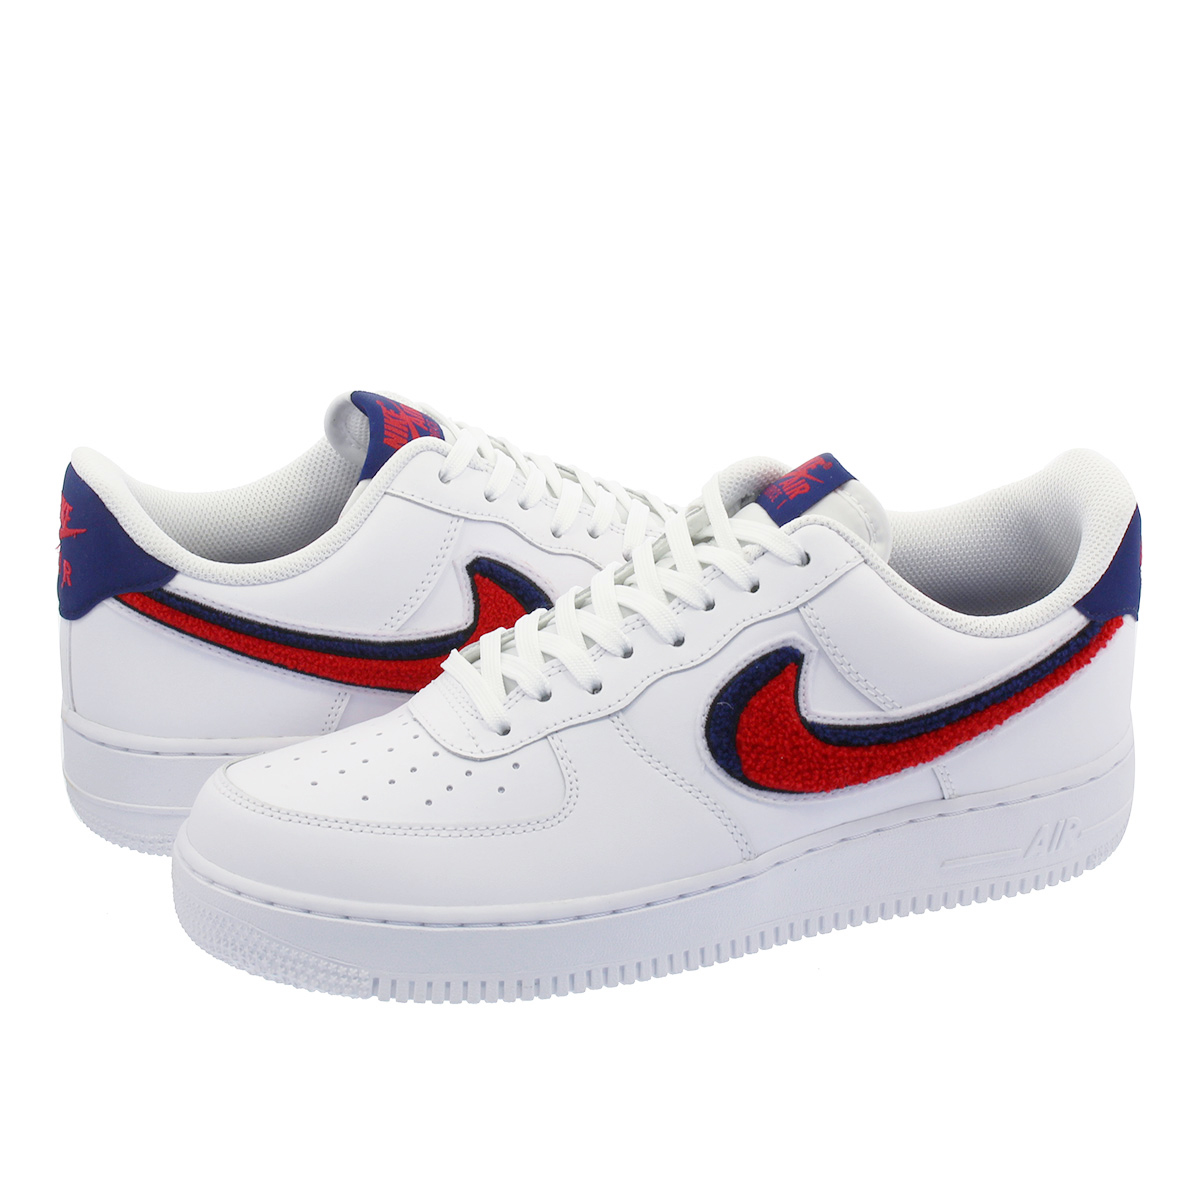 red and blue air forces